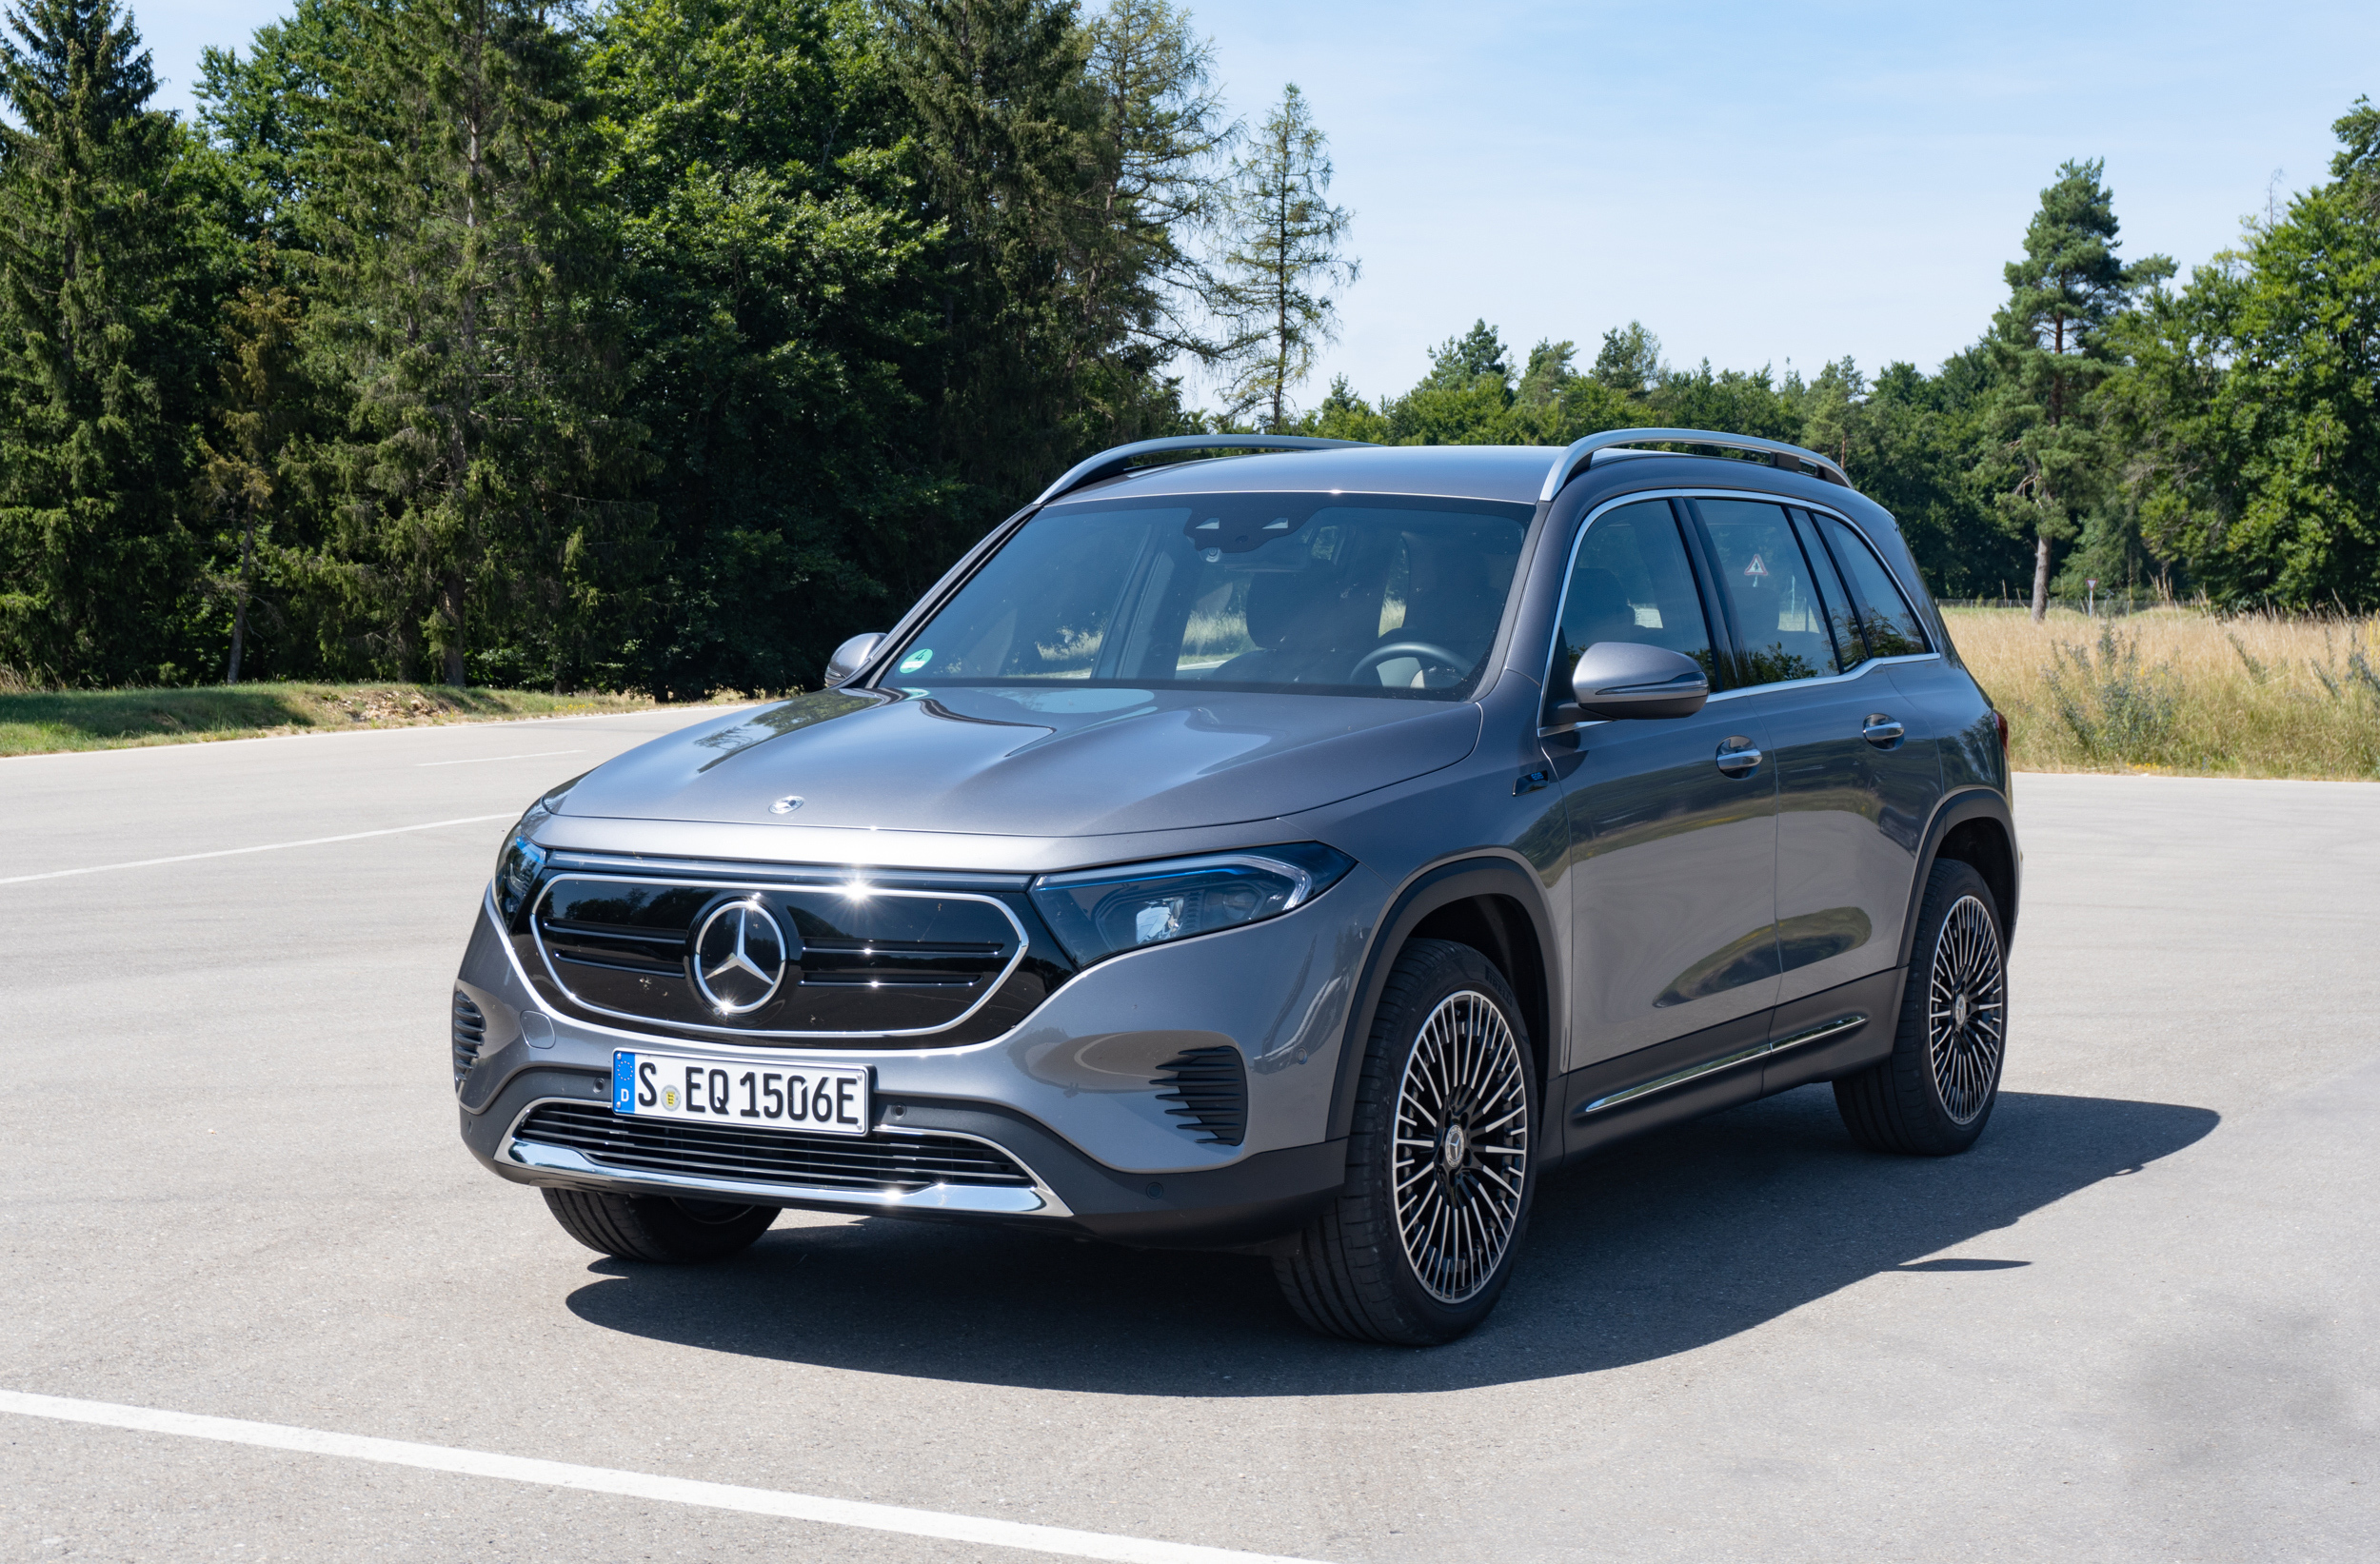 Mercedes EQB first drive: A great around-town electric SUV